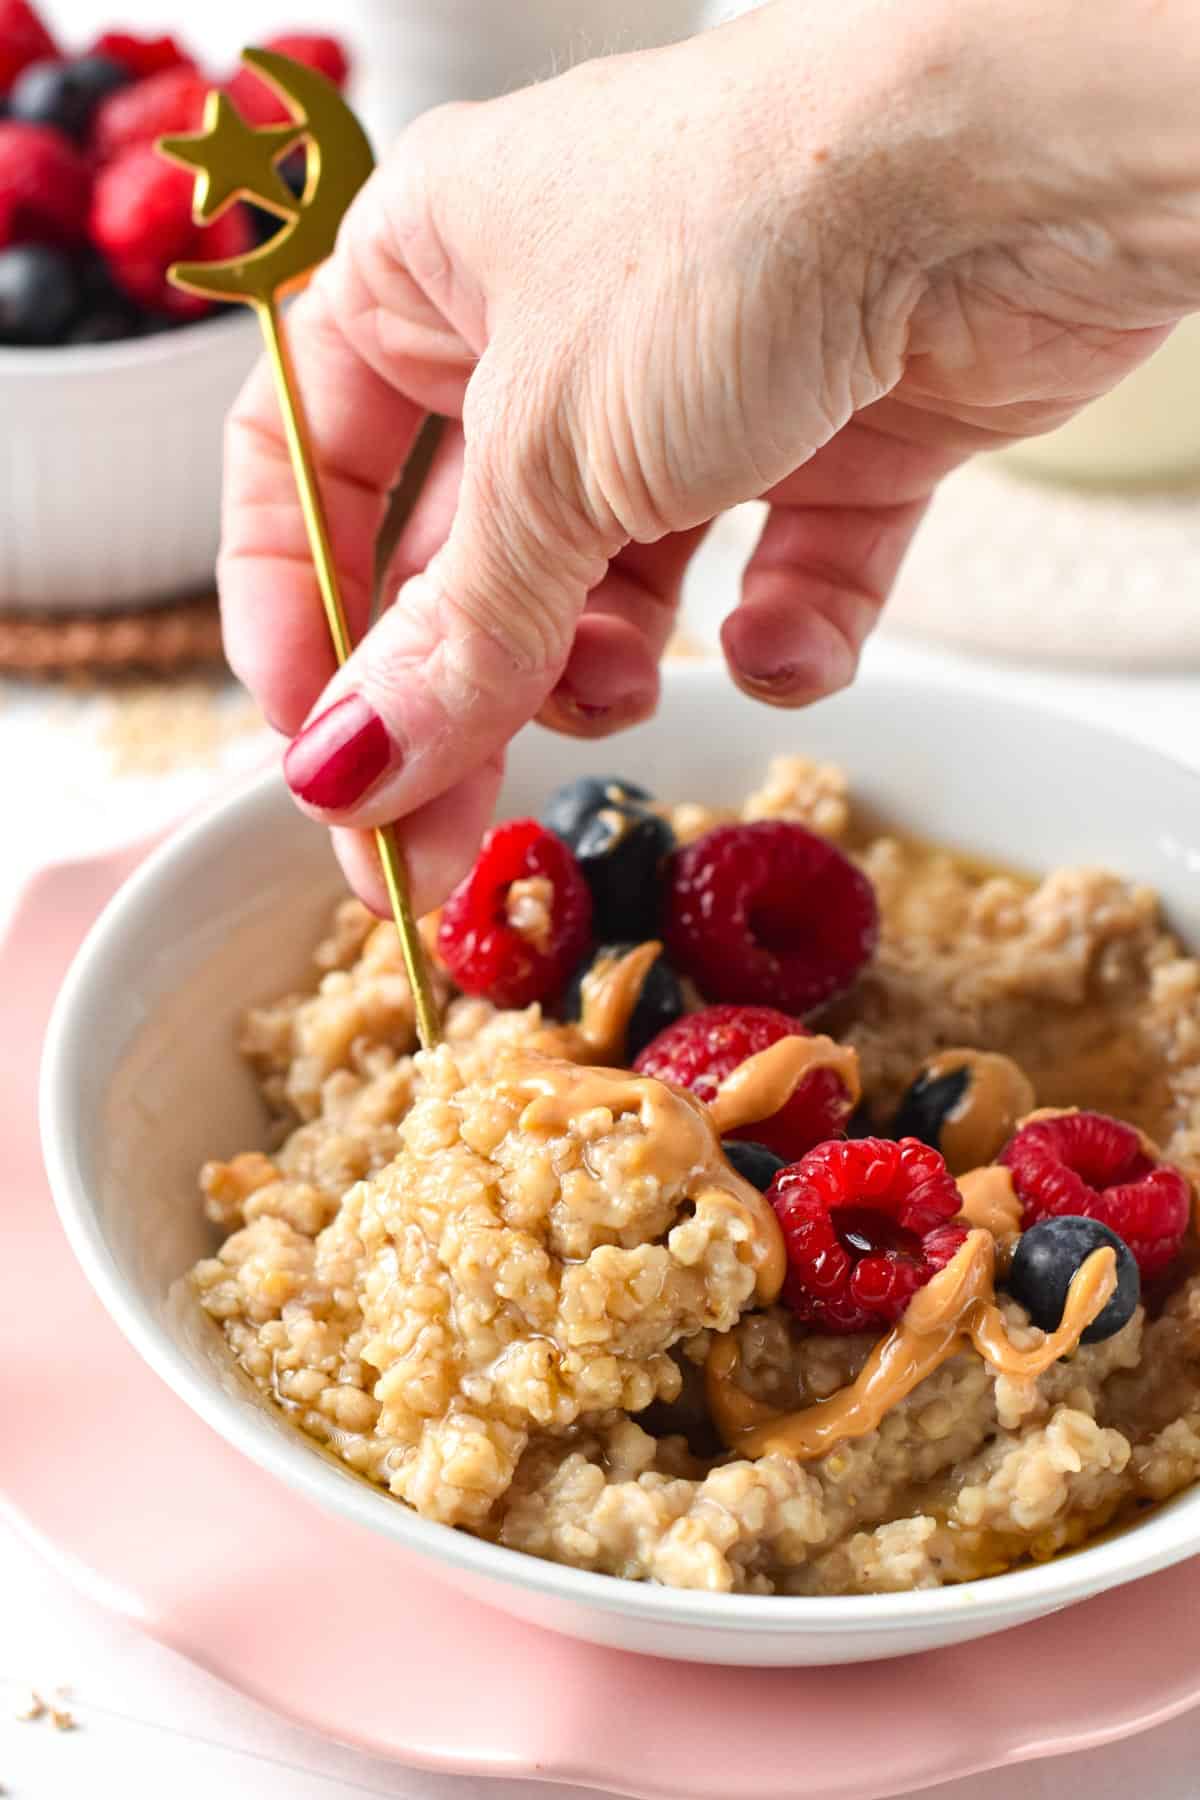 Enjoy a creamy breakfast with this Protein Steel cut Oats recipe packed with 22 grams of protein per serve.